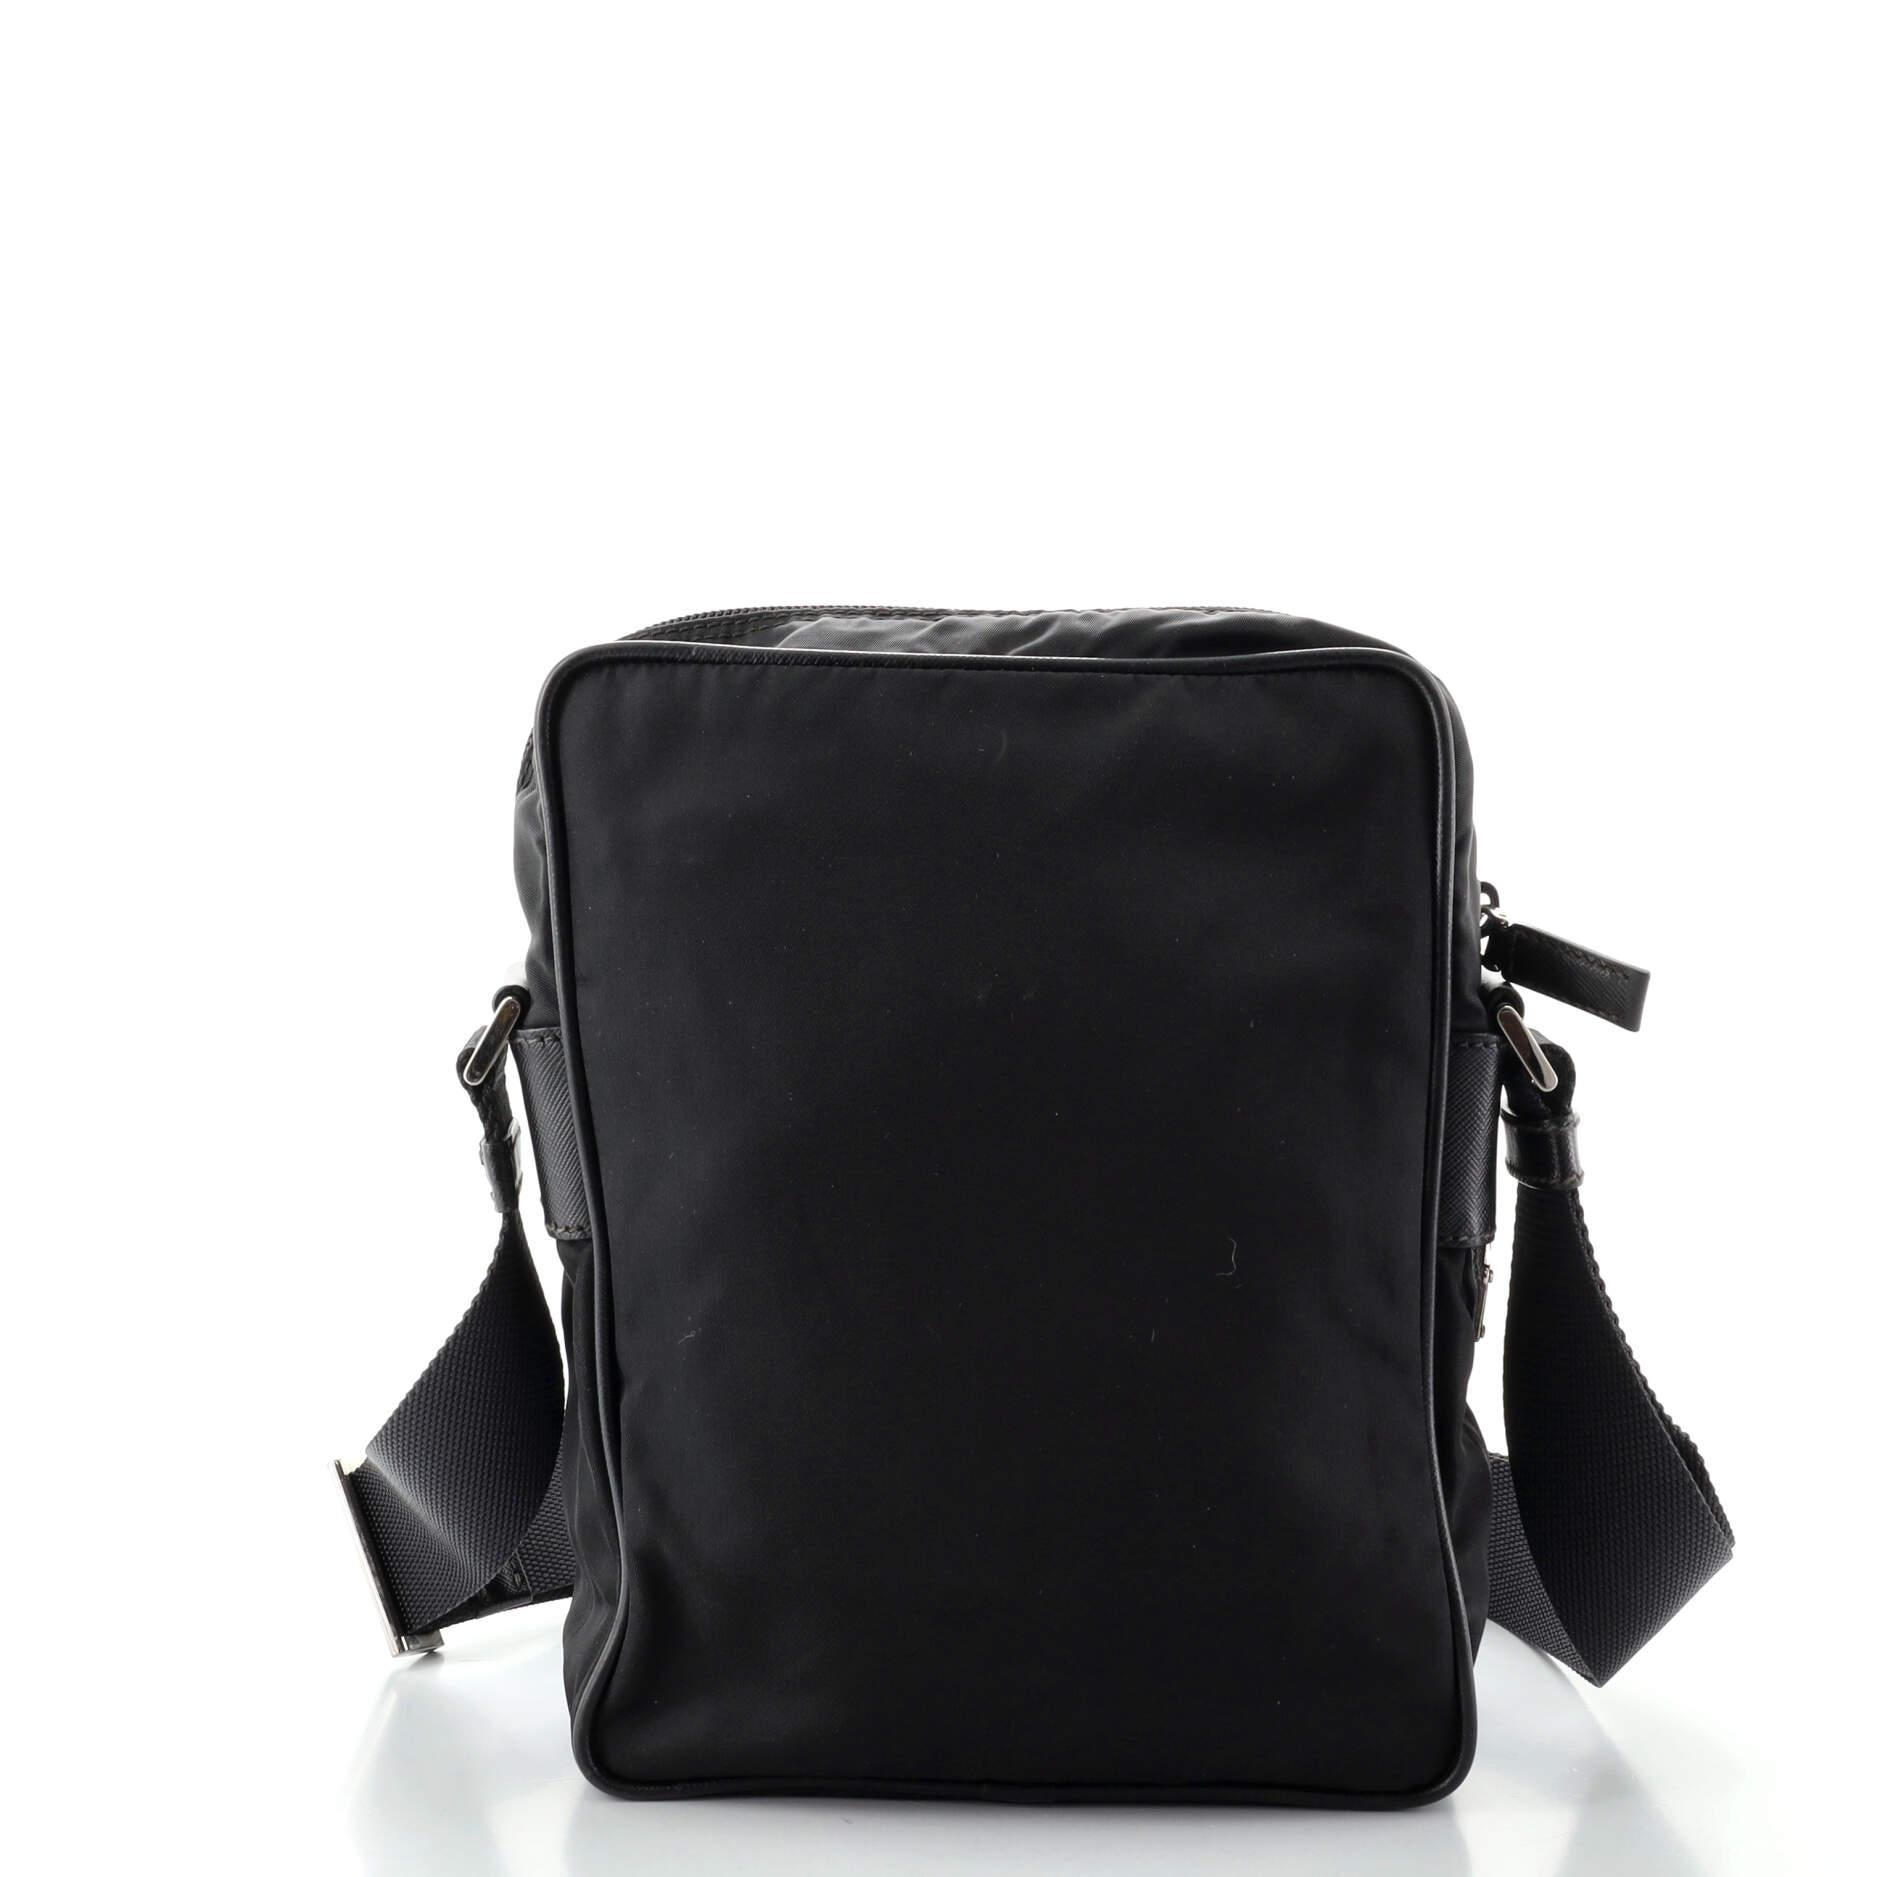 Prada Black Tessuto Nylon Front Pocket Crossbody Bag

Condition Details: Creasing on exterior, moderate discoloration and wear on exterior trims. Light marks in interior, scratches and discoloration on hardware.

68250MSC